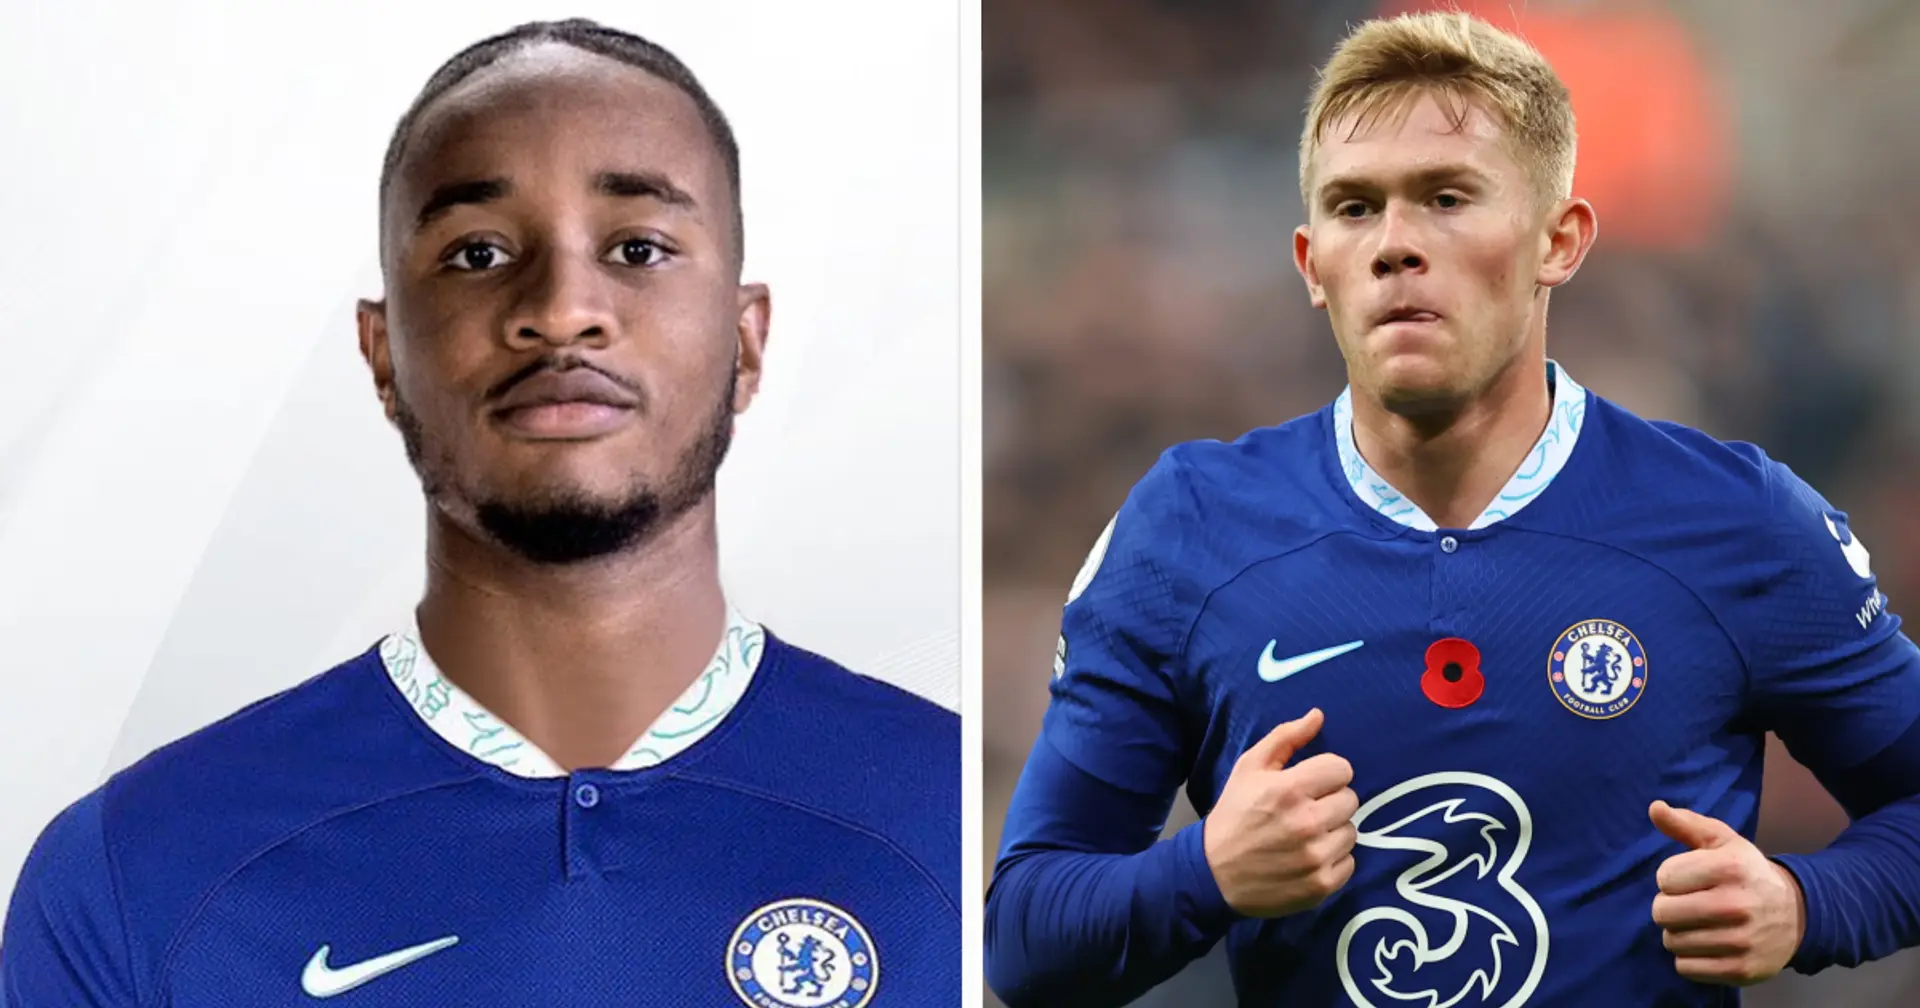 Chelsea's transfer plan after Nkunku revealed and 3 more big stories you might've missed